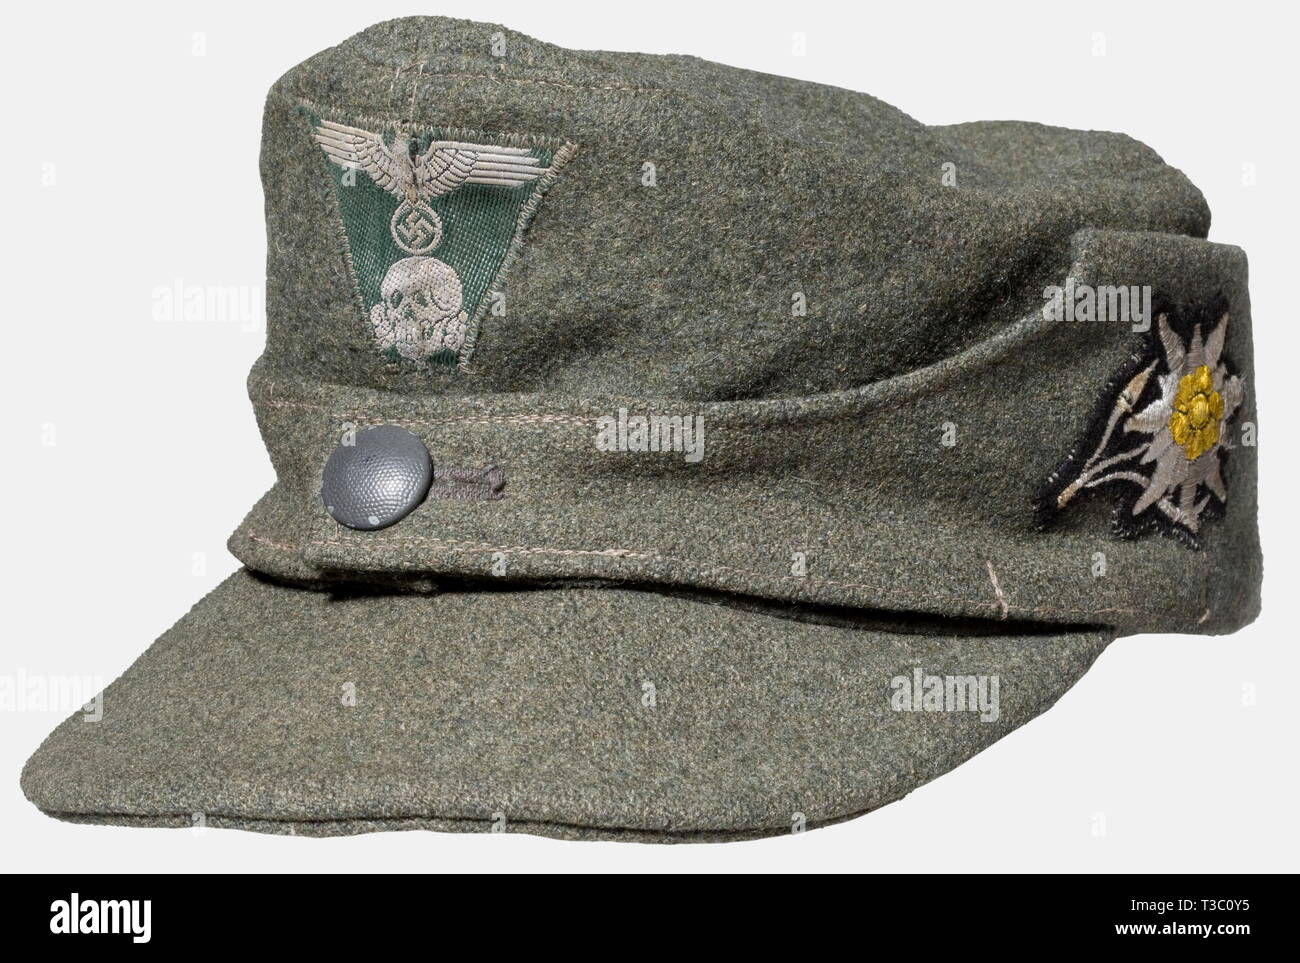 A field cap M 43 for enlisted men/NCOs, of the Mountain Troops Supply room item of field grey woolen material with a field grey lacquered button, machine-embroidered Edelweiß, trapeziform BeVo issue eagle. RBN and size stamp '57' in the artificial silk liner. historic, historical, 1930s, 20th century, Waffen-SS, armed division of the SS, armed service, armed services, NS, National Socialism, Nazism, Third Reich, German Reich, Germany, military, militaria, utensil, piece of equipment, utensils, object, objects, stills, clipping, clippings, cut out, cut-out, cut-outs, fascism, Editorial-Use-Only Stock Photo